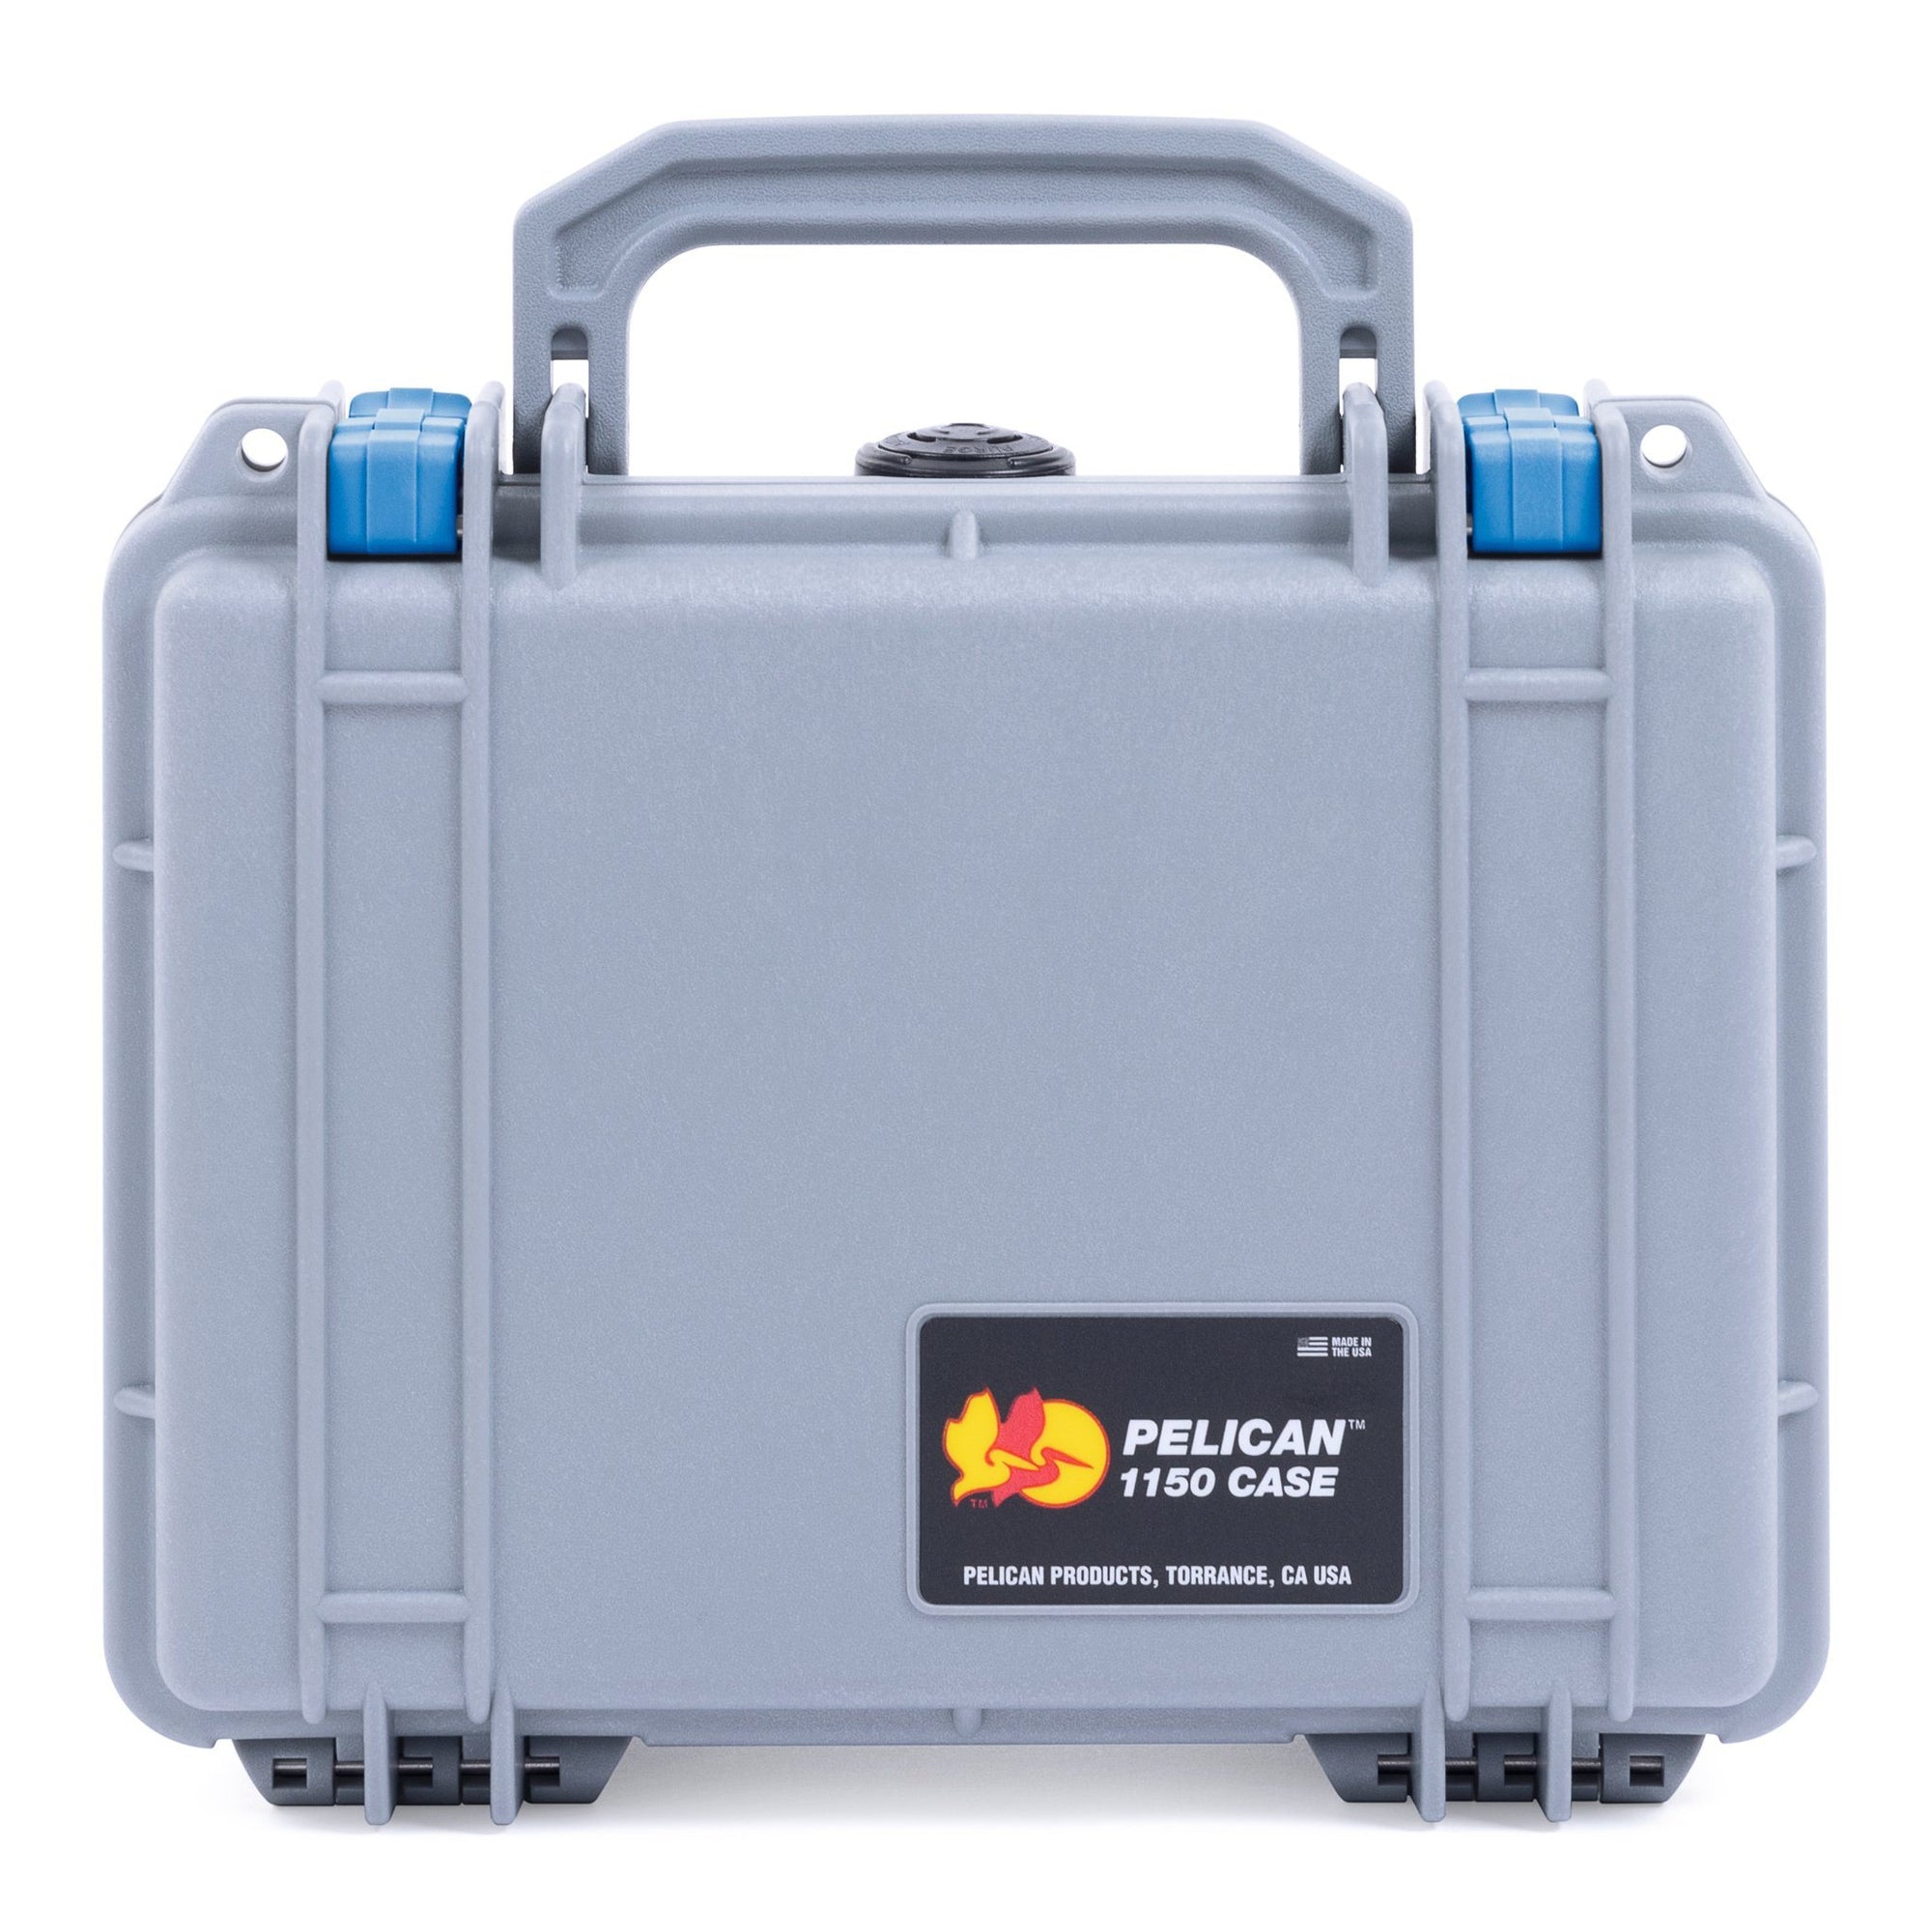 Pelican 1150 Case, Silver with Blue Latches ColorCase 